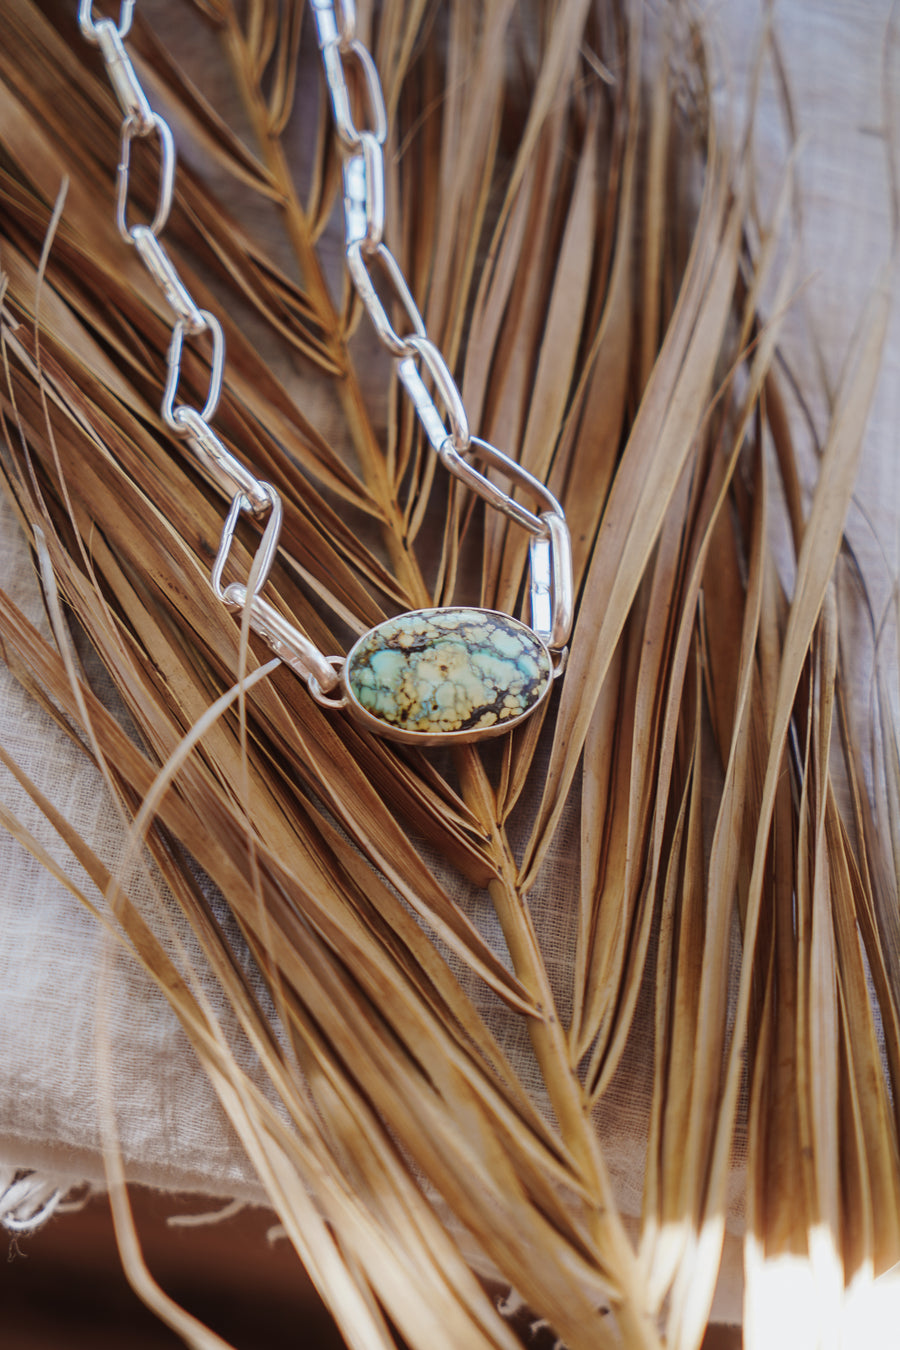 Daydreamer Necklace in Hubei Turquoise